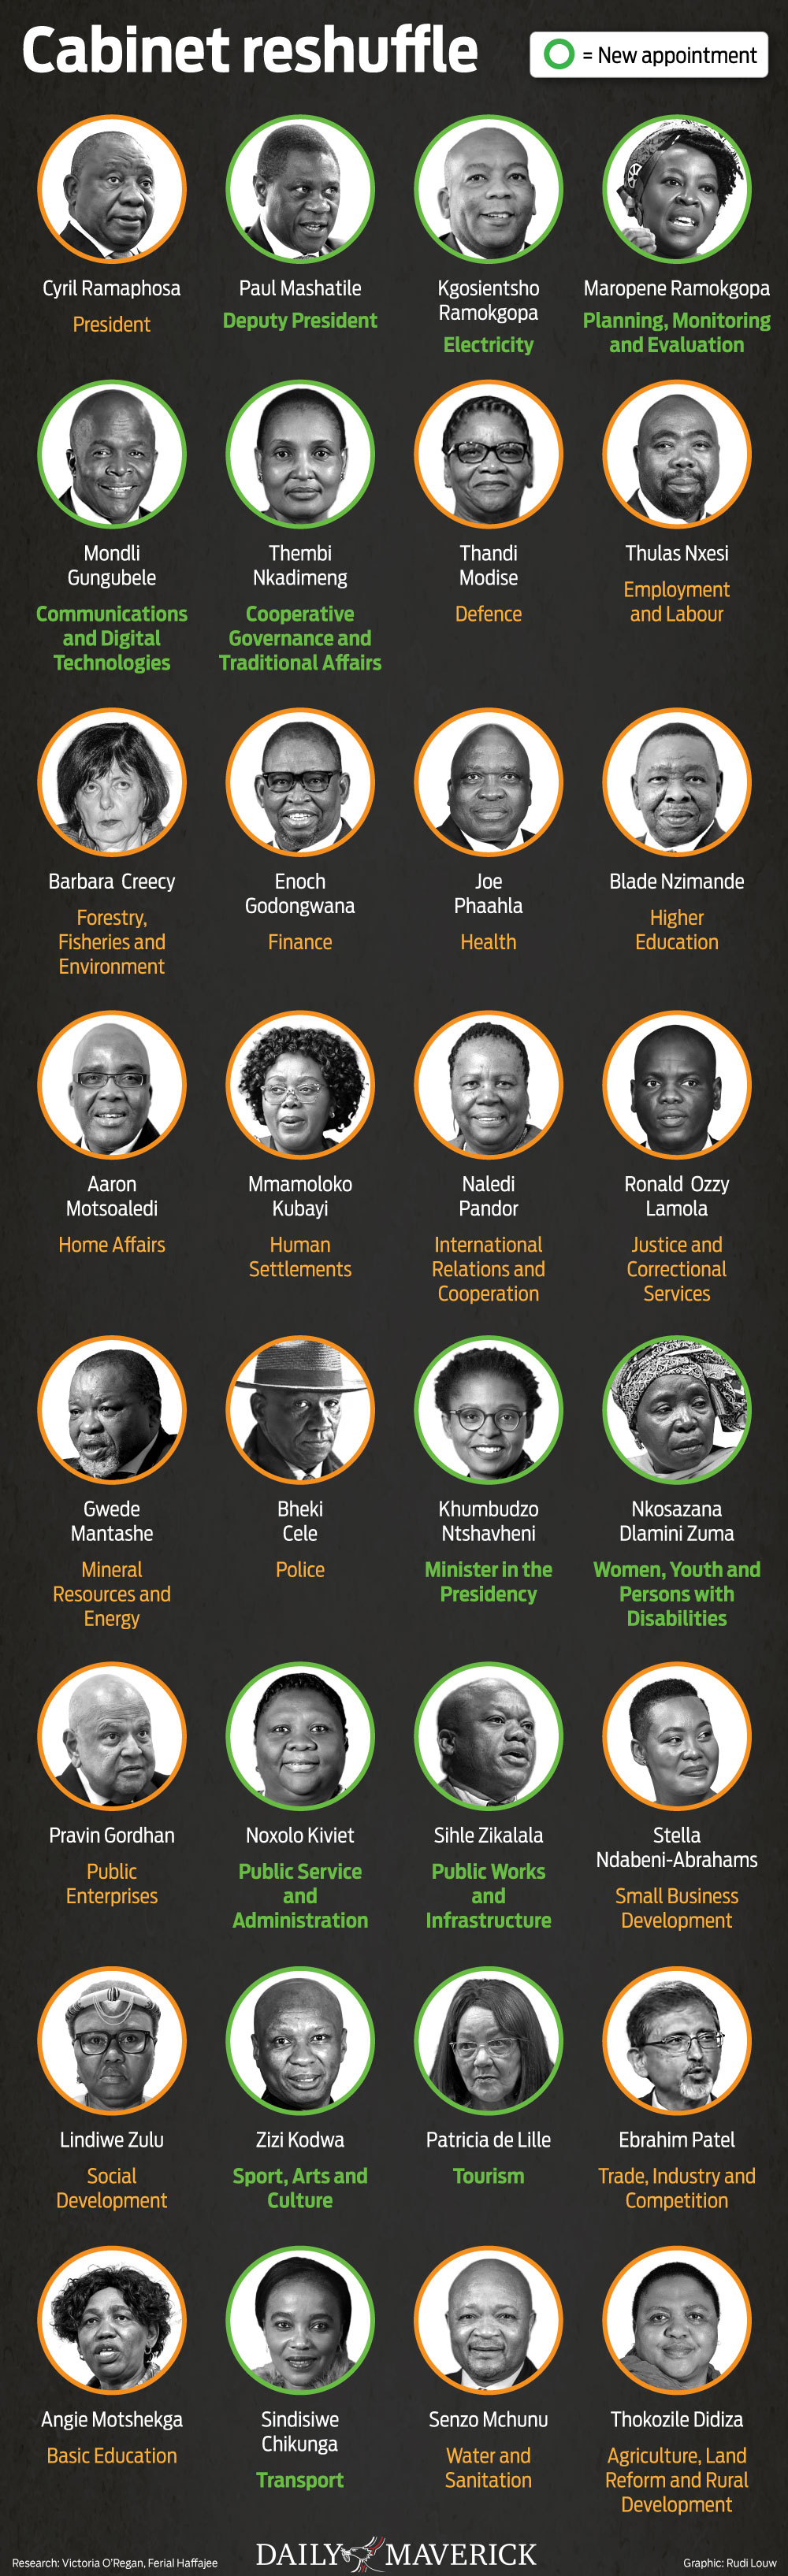 The new Cabinet announce by President Cyril Ramaphosa on 6 March 2022